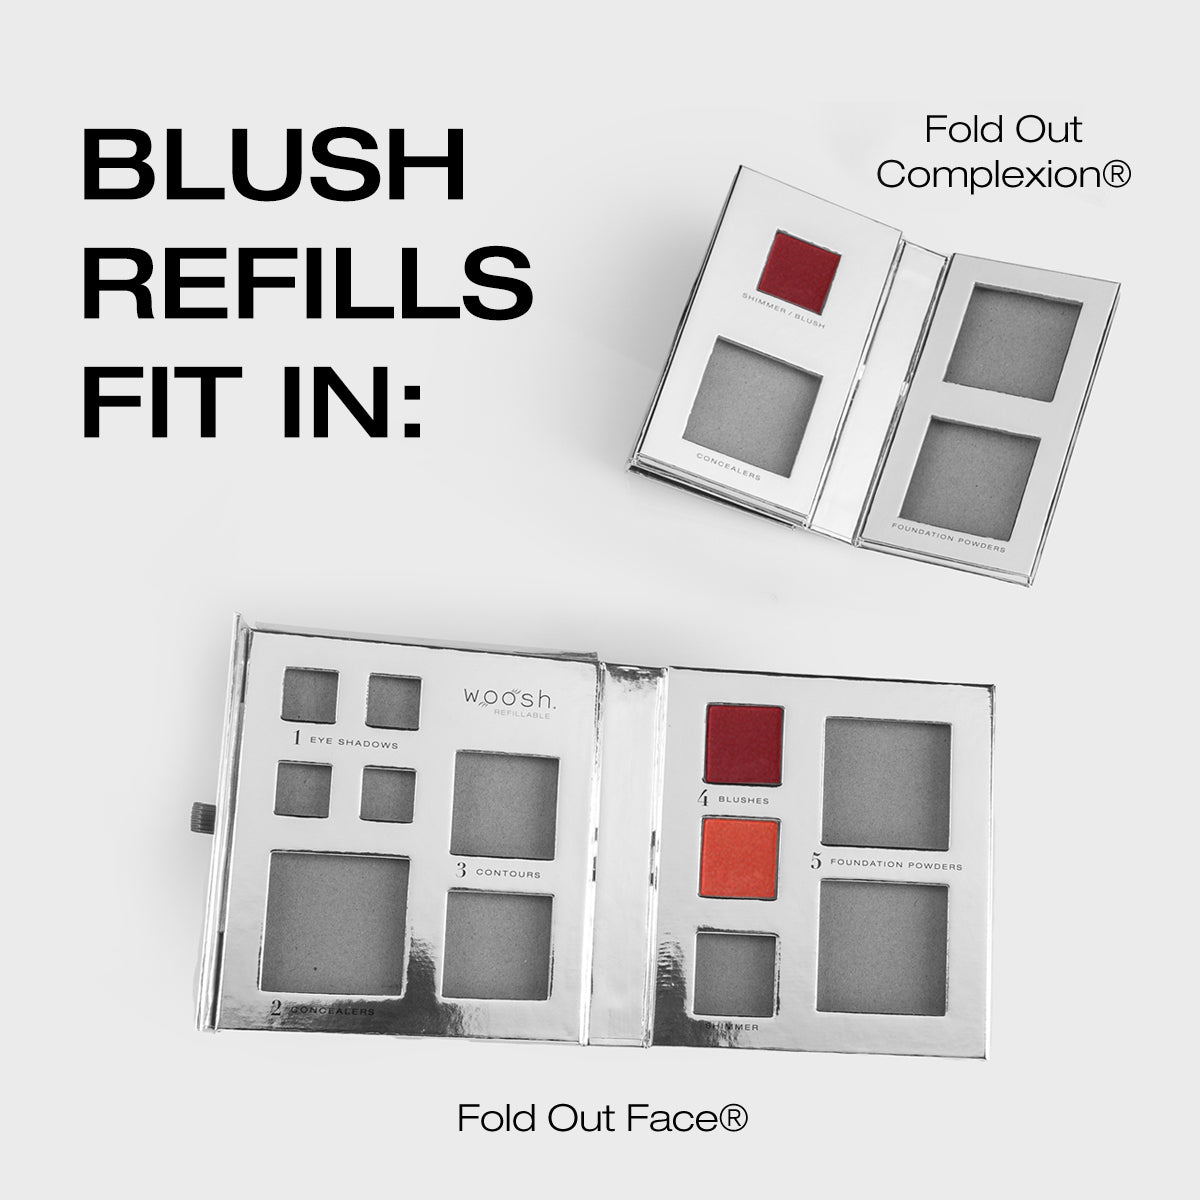 Demonstration of how blush refills fit in the fold out face and fold out complexion